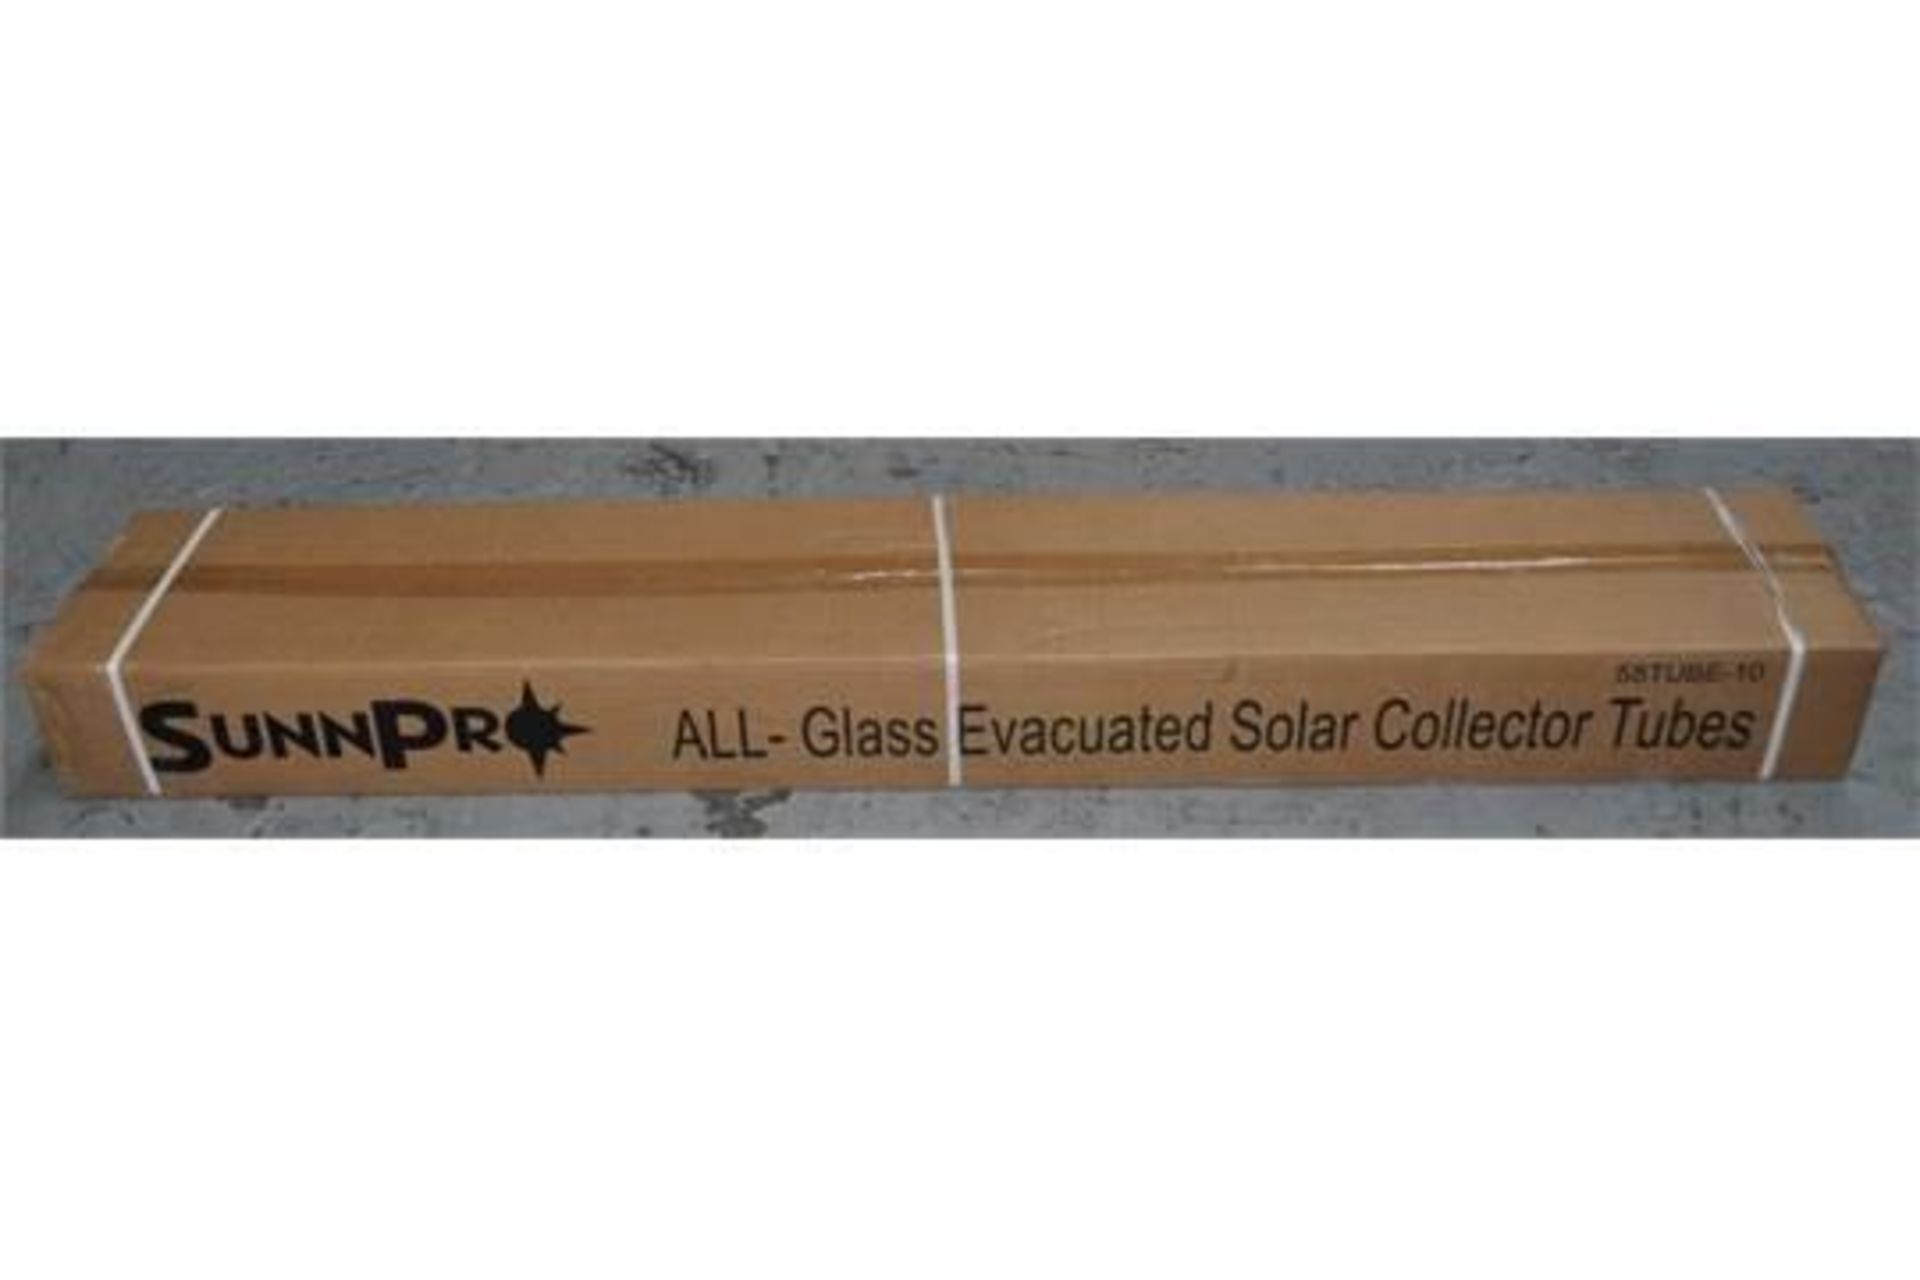 10 x Sunnpro All Glass Evacuated Solar Collector Tubes - Spare Solar Tube Pack For Sunnpro SP30 - - Image 3 of 3